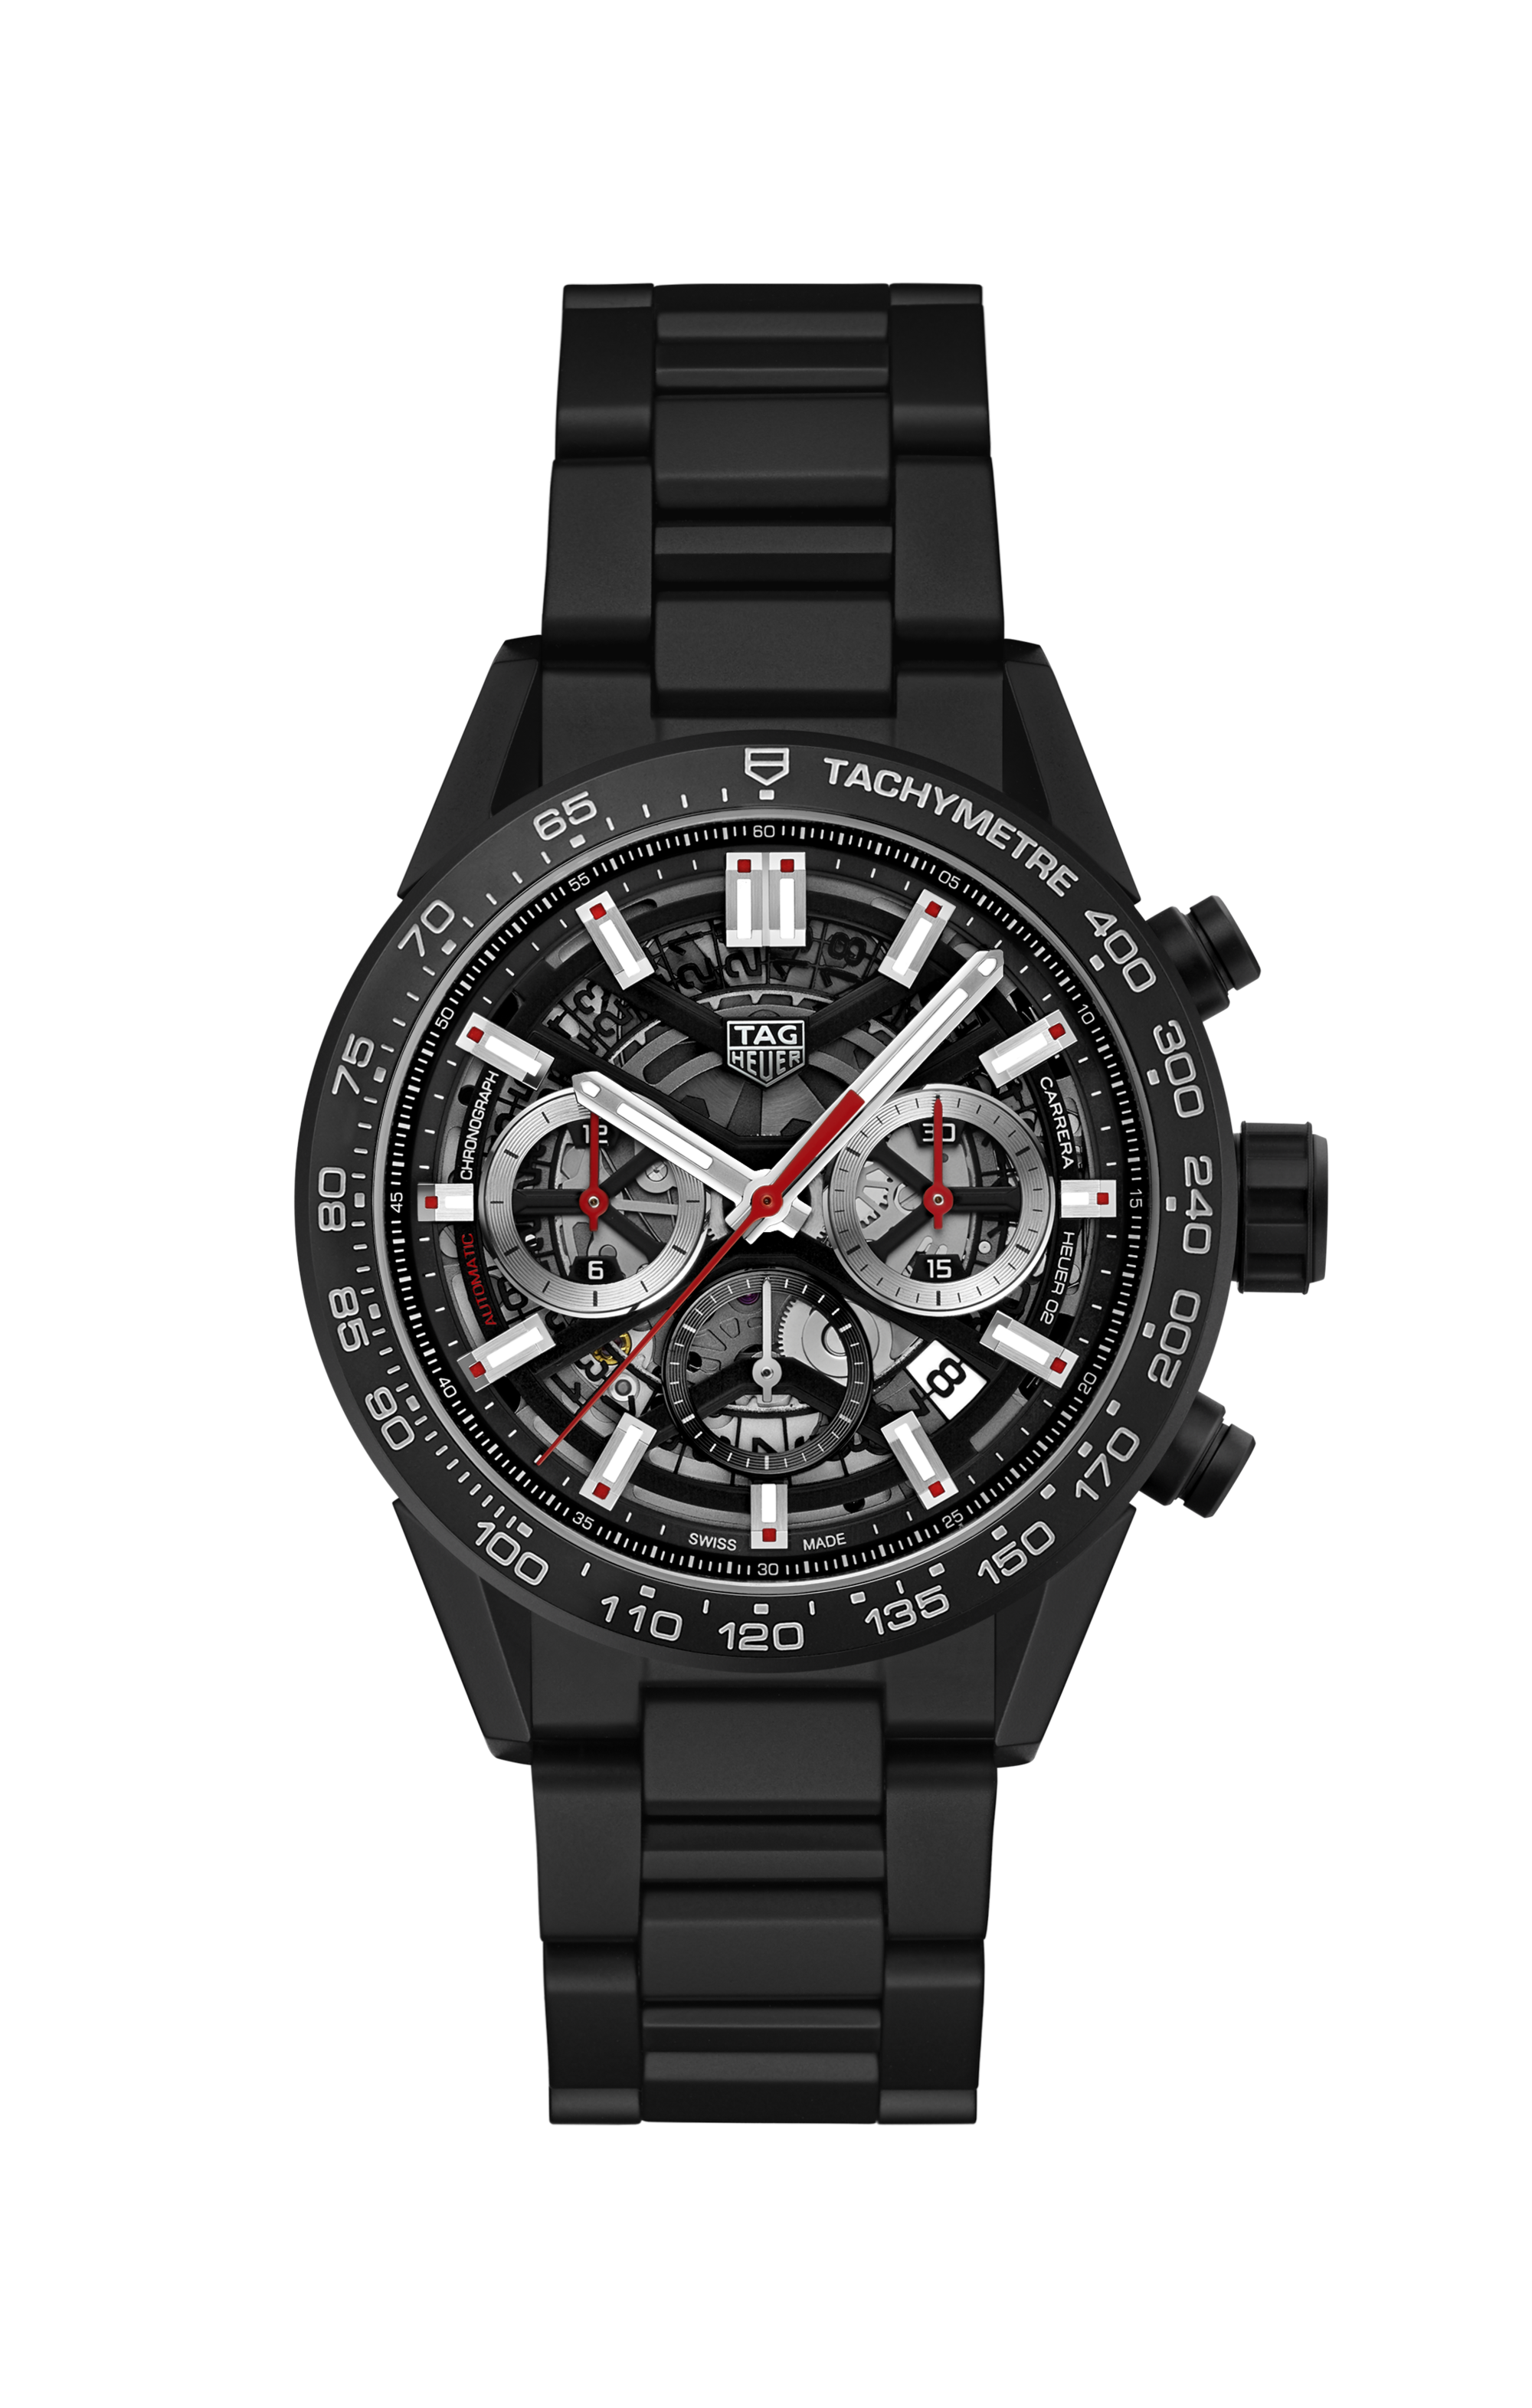 Tag Heuer Just Unveiled Its Funnest Watch Collaboration Yet | GQ